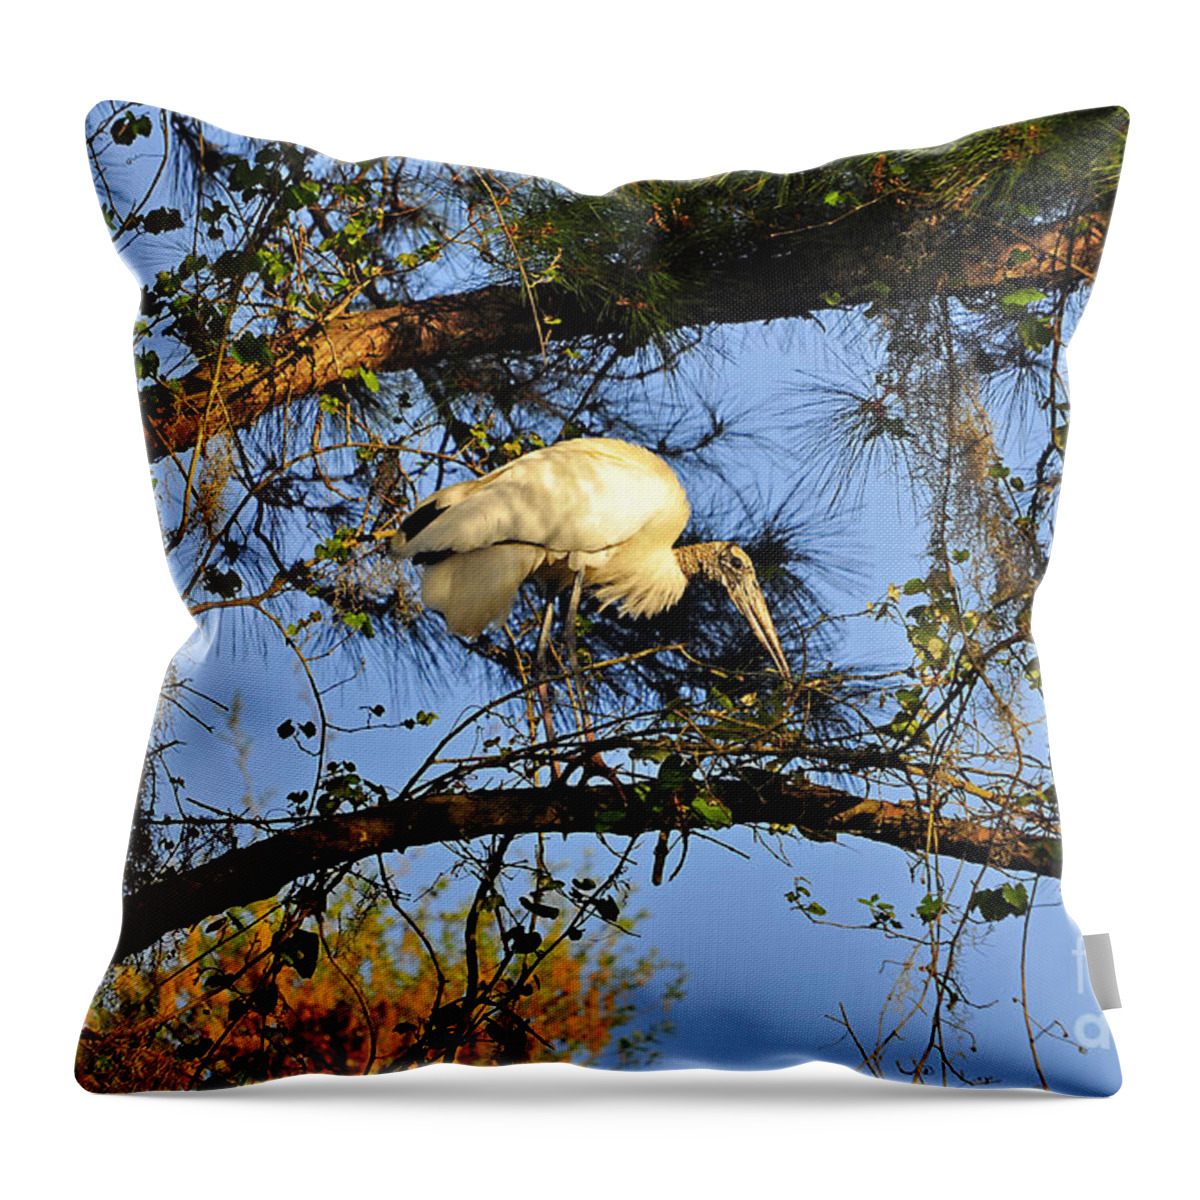 Stork Throw Pillow featuring the photograph Wood Stork Perch by Al Powell Photography USA